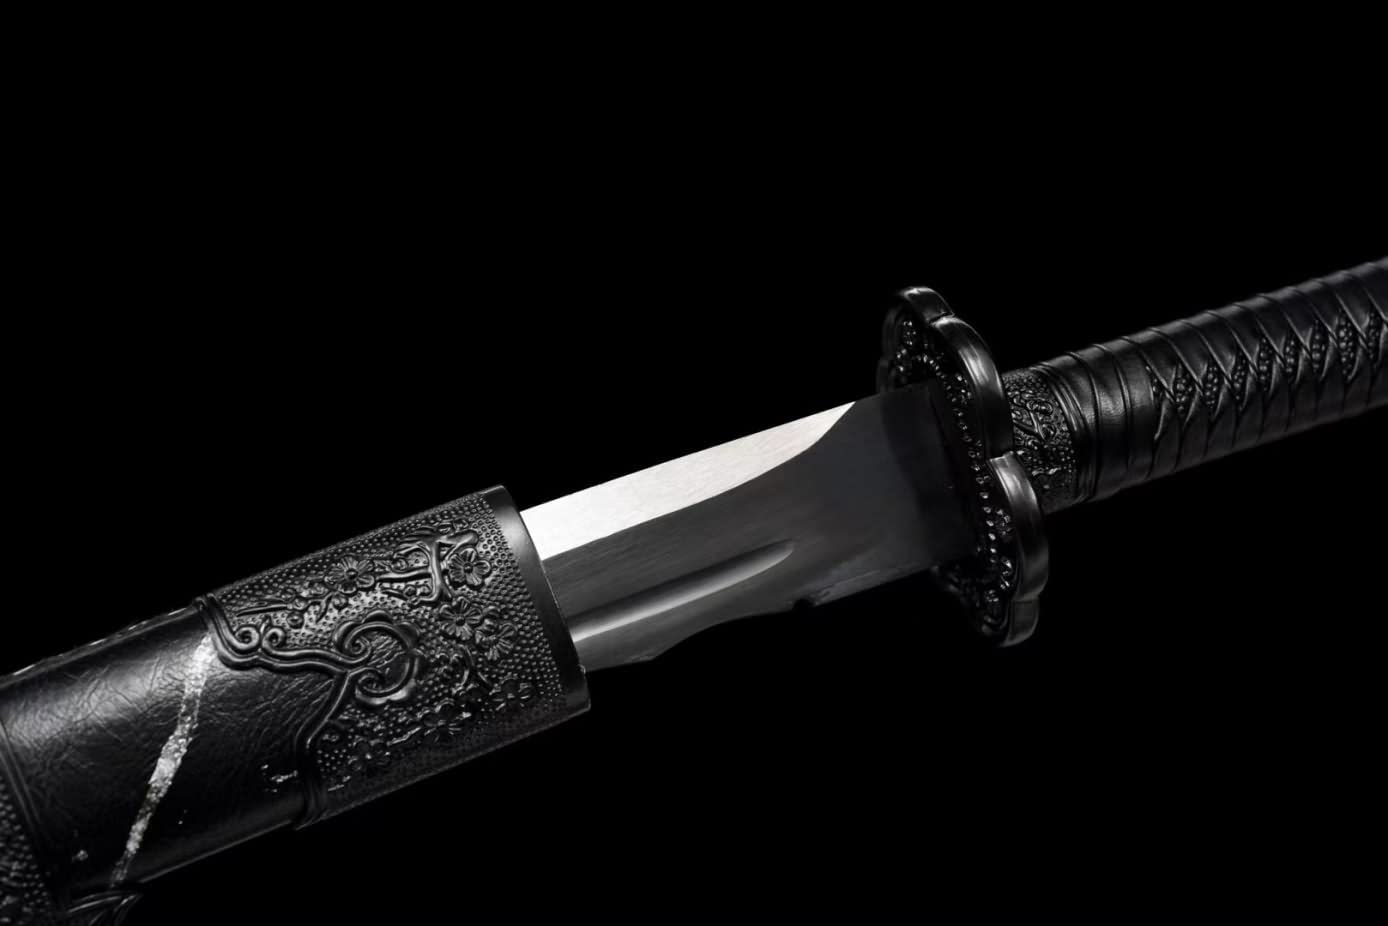 Yanling dao Swords Real,Saber High Carbon Black Blade,Alloy Fittings